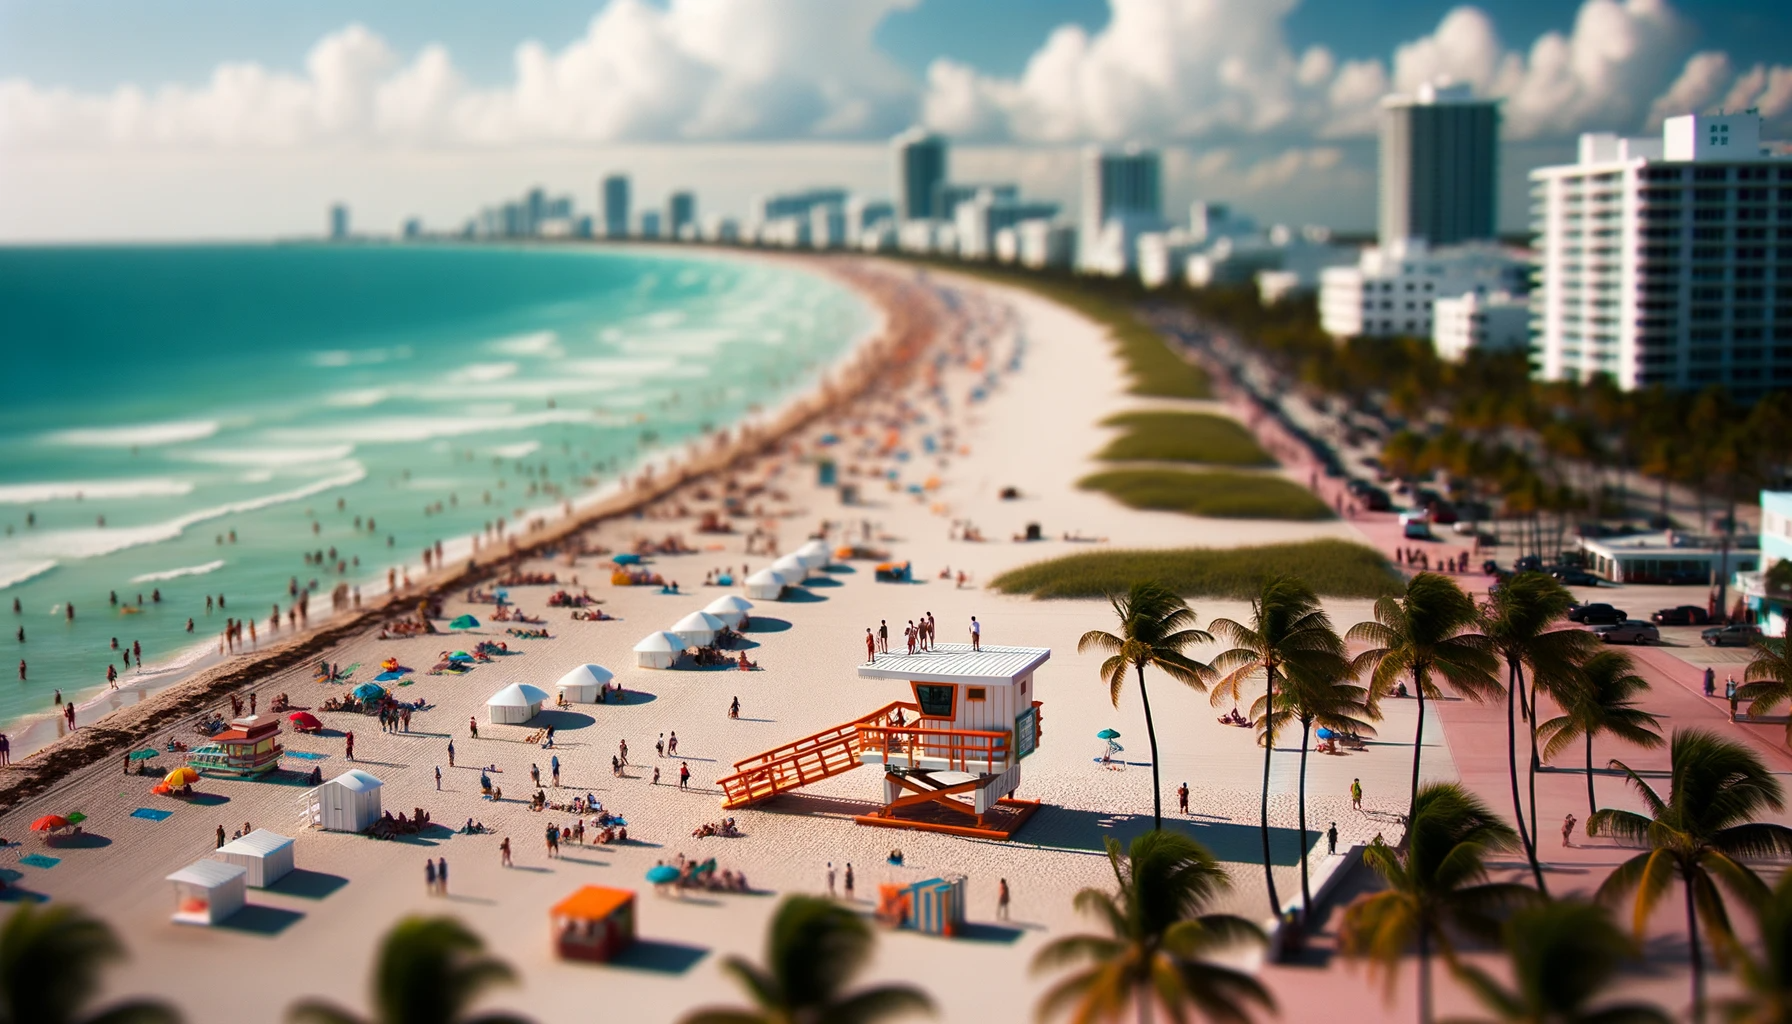 Table 2.3_Tilt-shift image of Miami South Beach.png